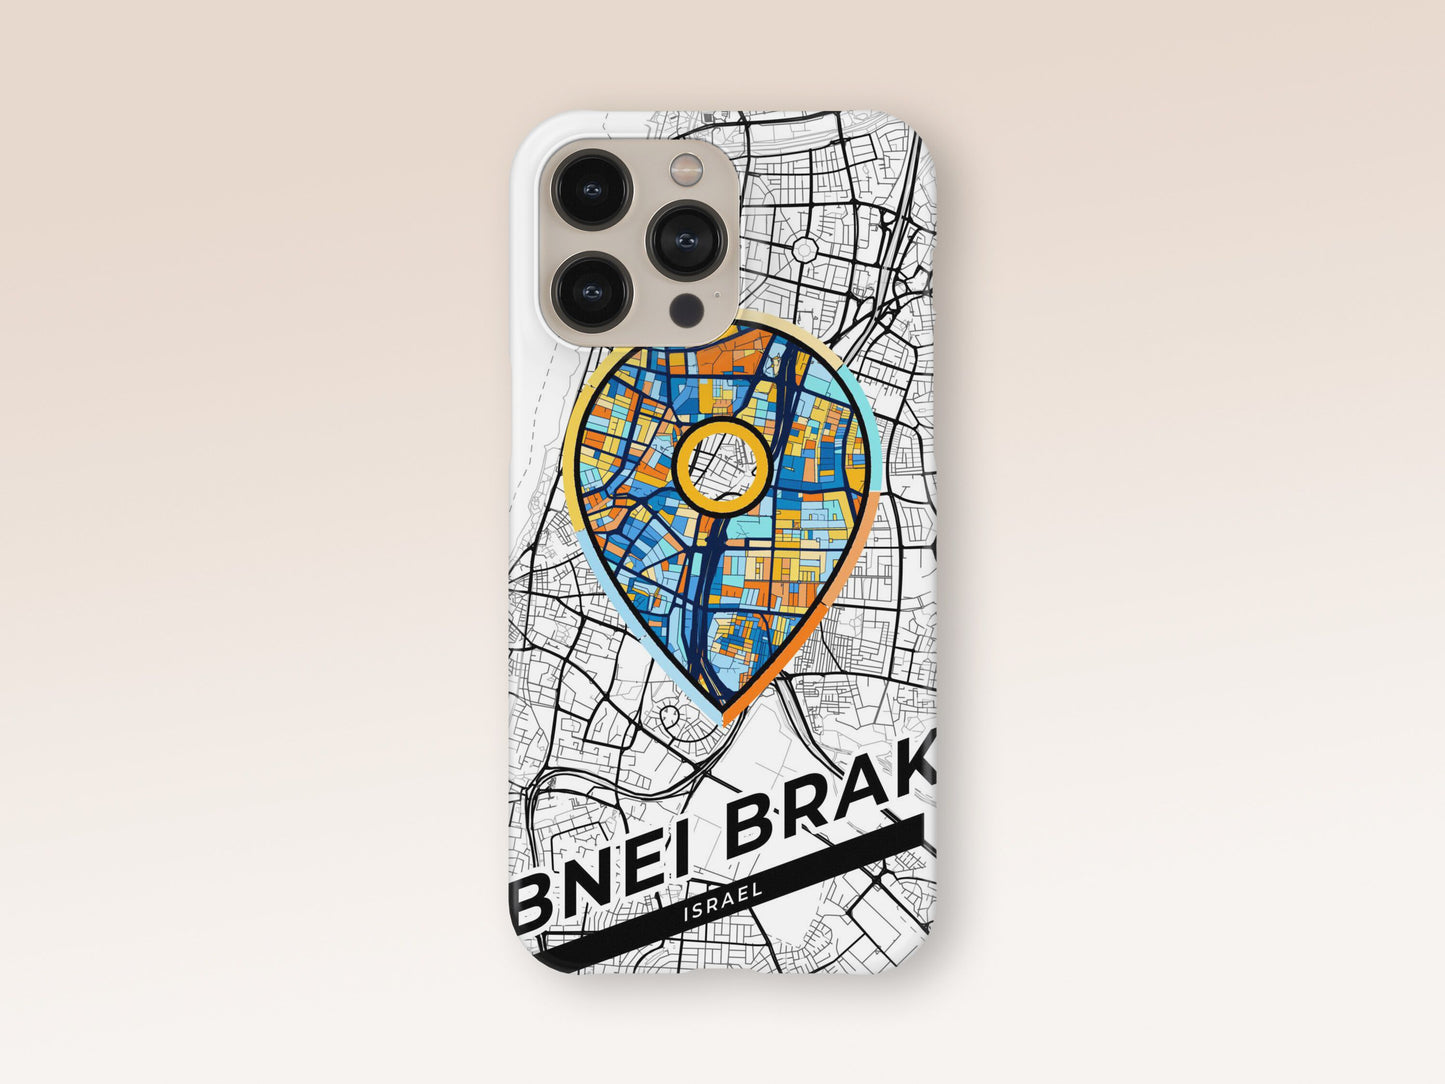 Bnei Brak Israel slim phone case with colorful icon. Birthday, wedding or housewarming gift. Couple match cases. 1